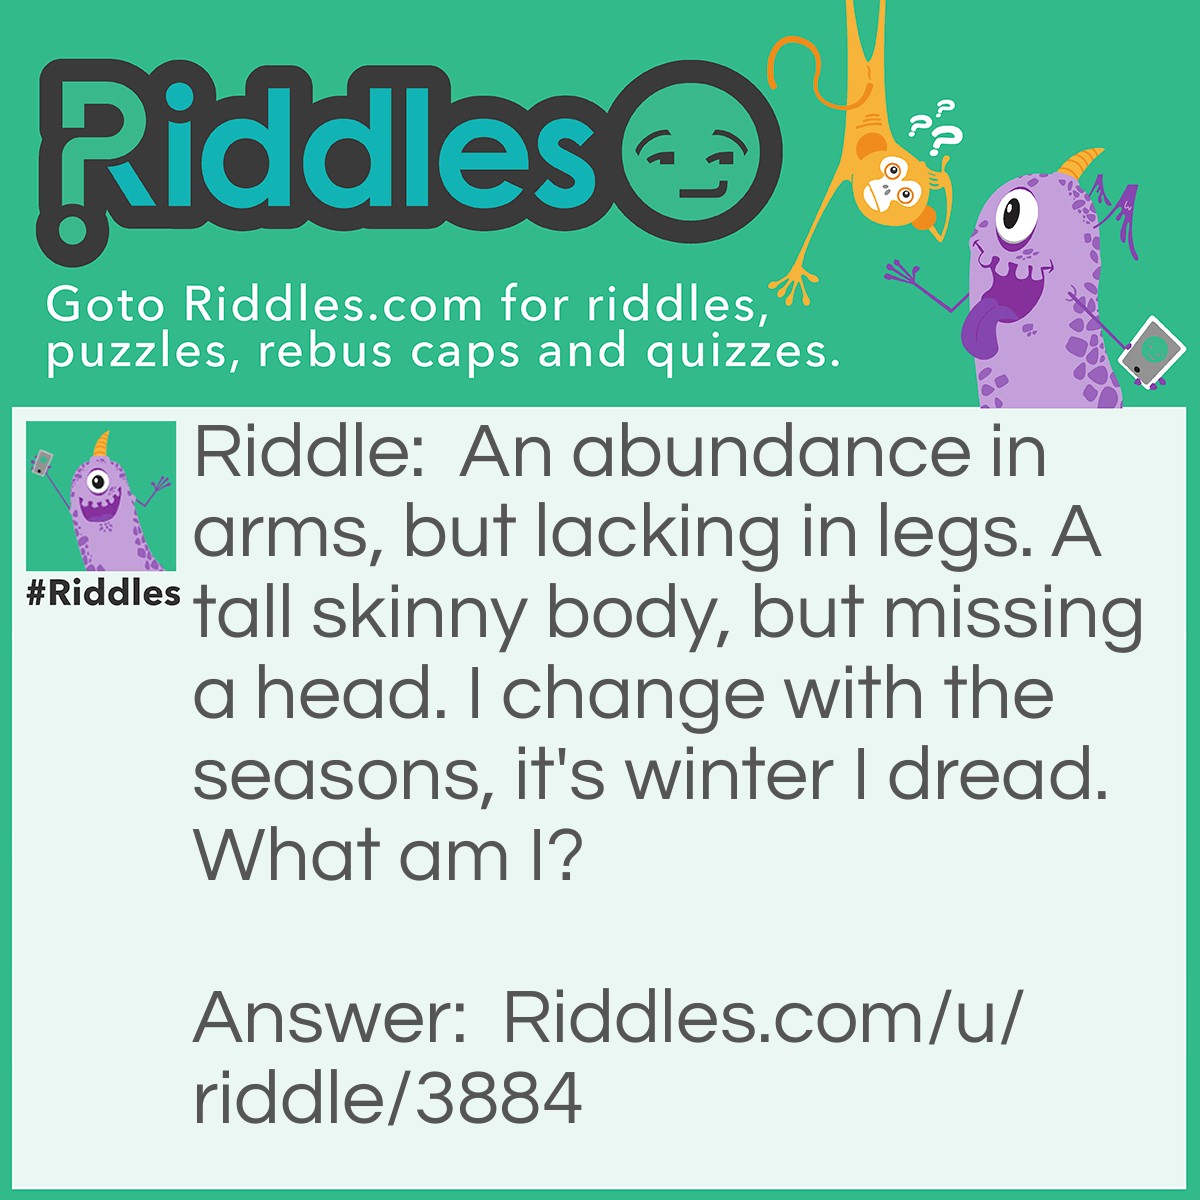 Riddle: An abundance in arms, but lacking in legs. A tall skinny body, but missing a head. I change with the seasons, it's winter I dread. What am I? Answer: A Tree.